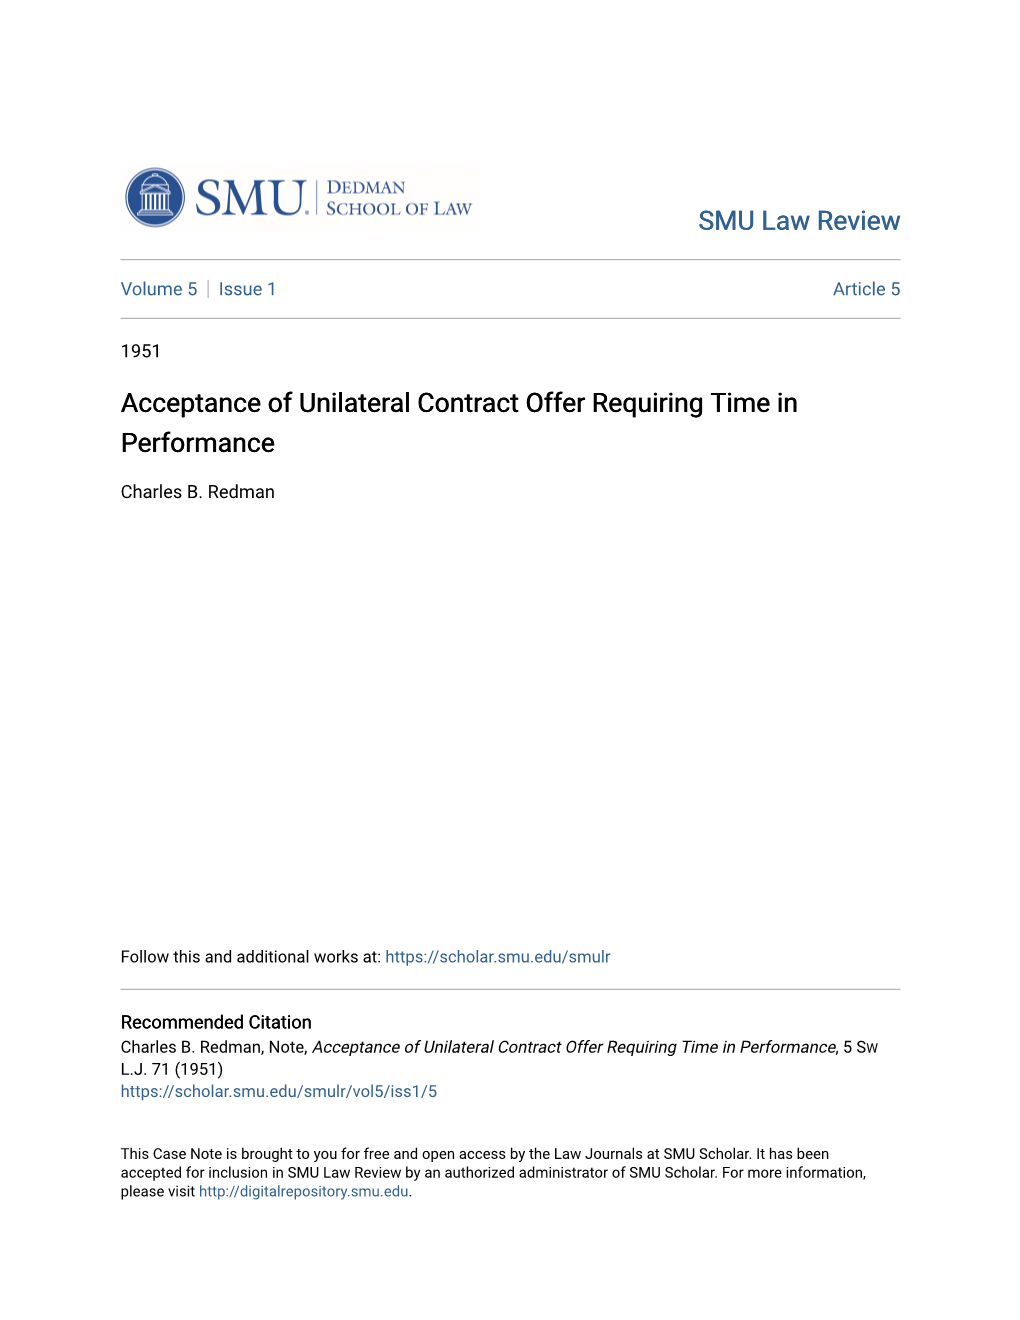 Acceptance of Unilateral Contract Offer Requiring Time in Performance